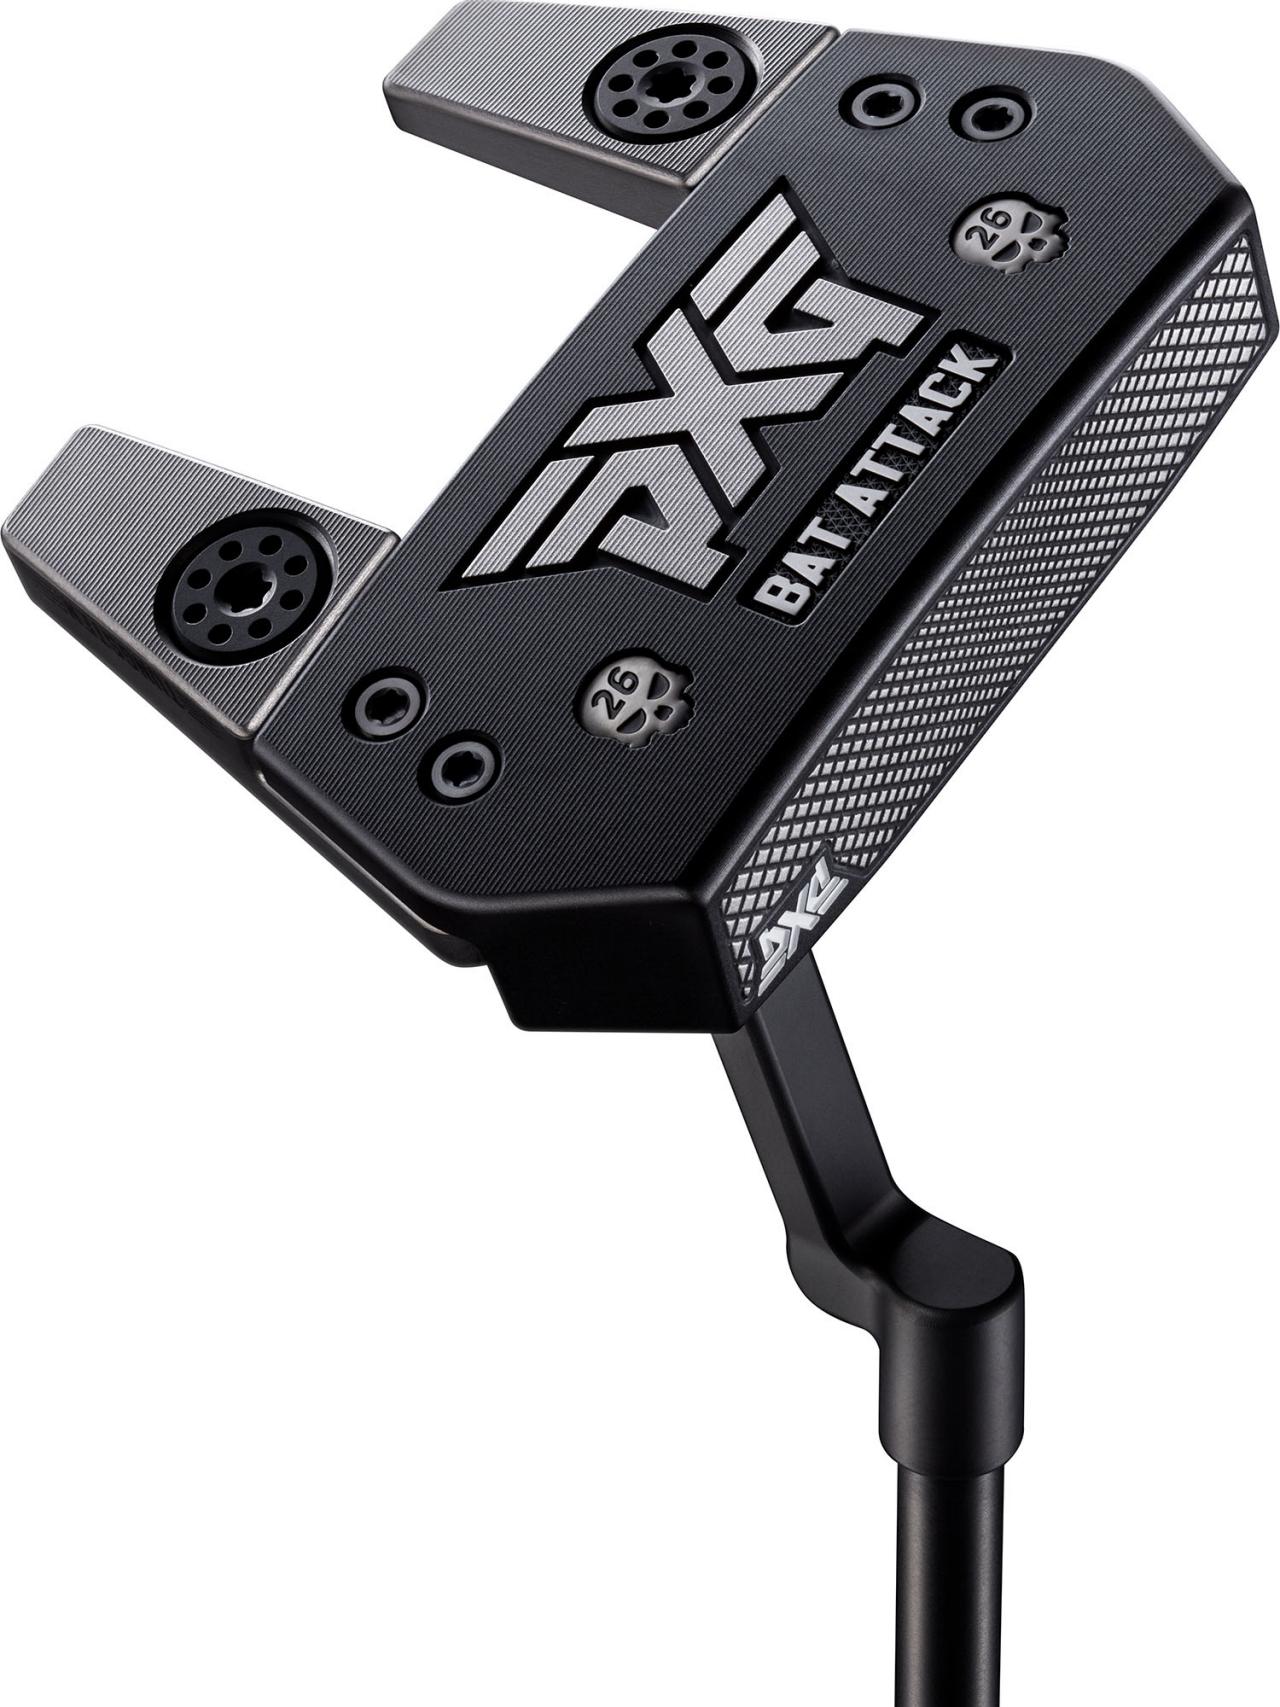 PXG's Battle Ready putters push new frontiers in consistency